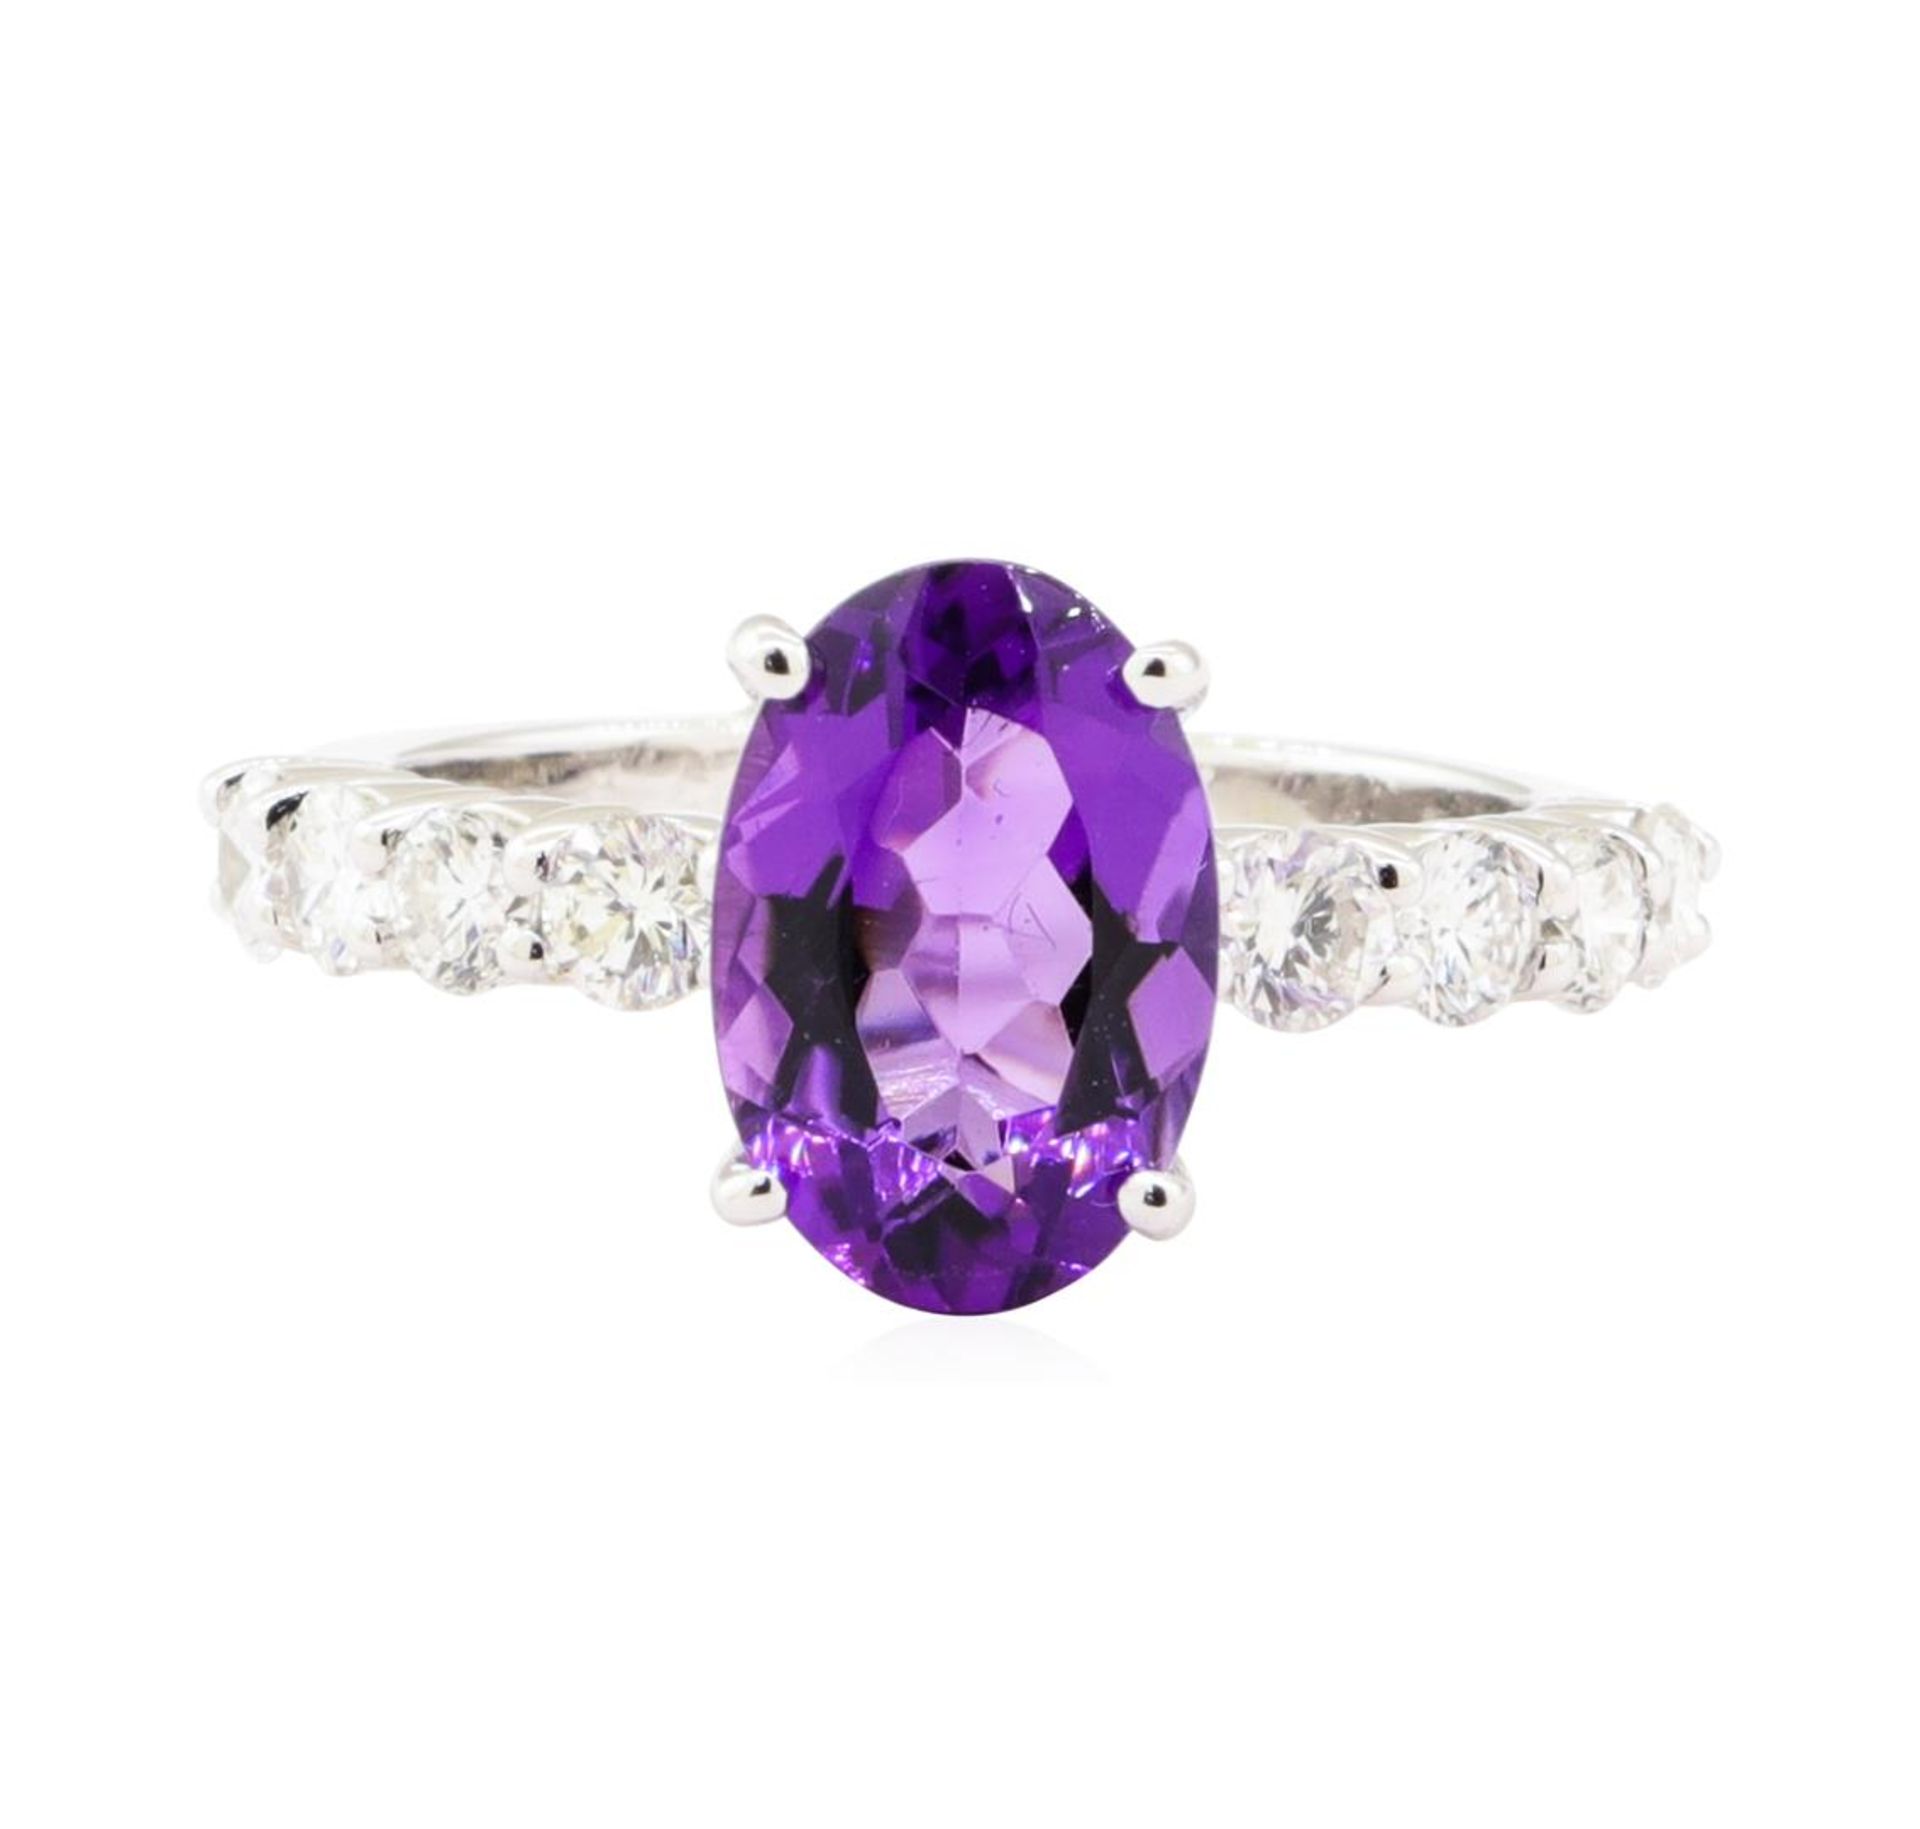 3.10 ctw Amethyst and Diamond Ring - 14KT White Gold - Image 2 of 4